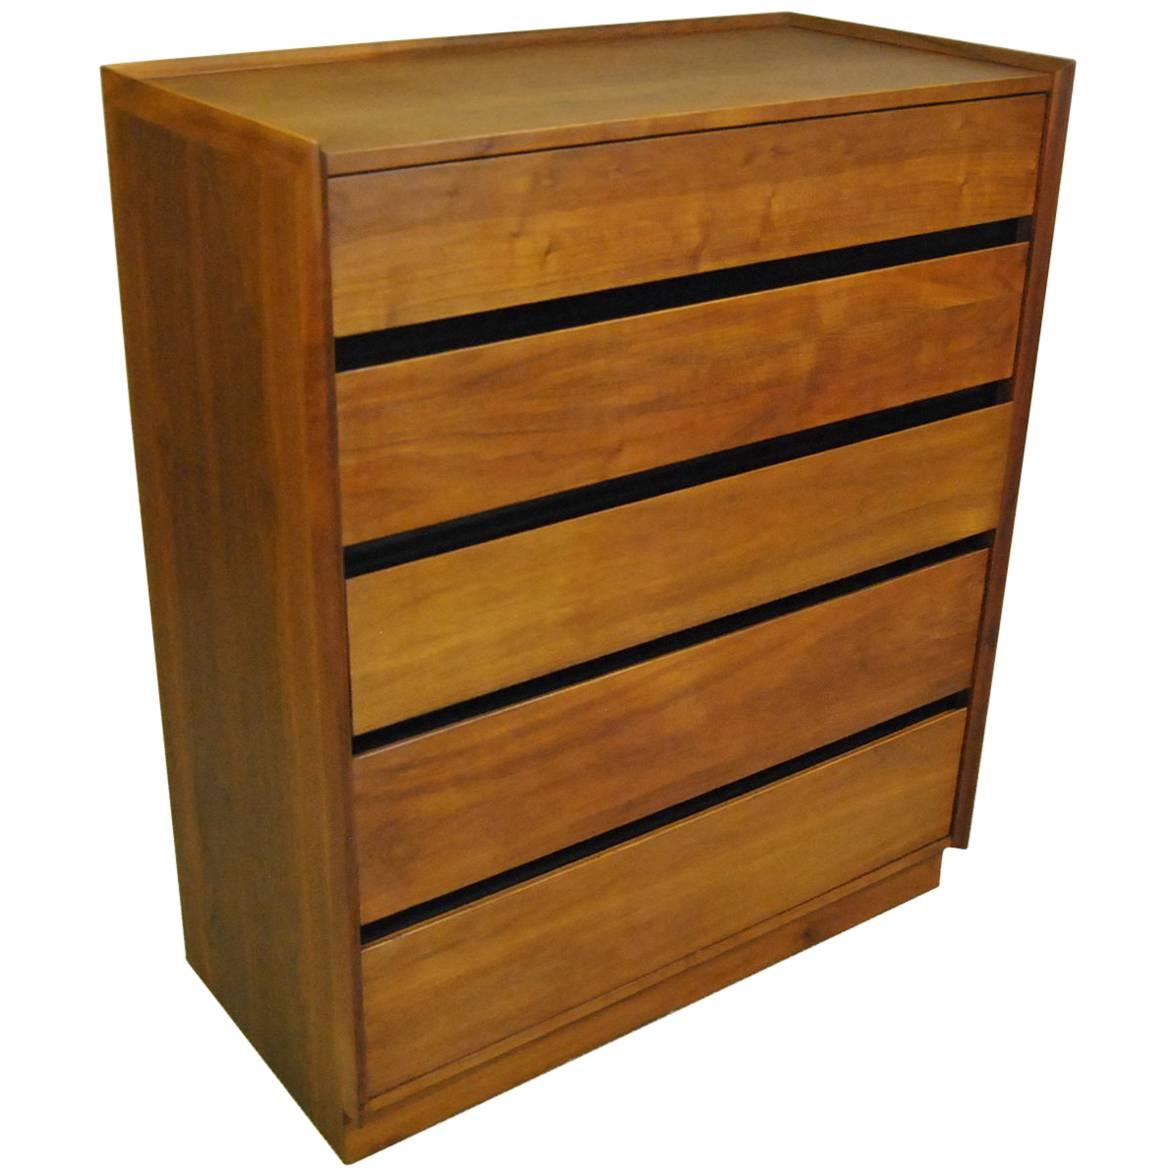 Mid-Century Modern Five-Drawer Walnut Tall Chest by Dillingham Esprit Collection